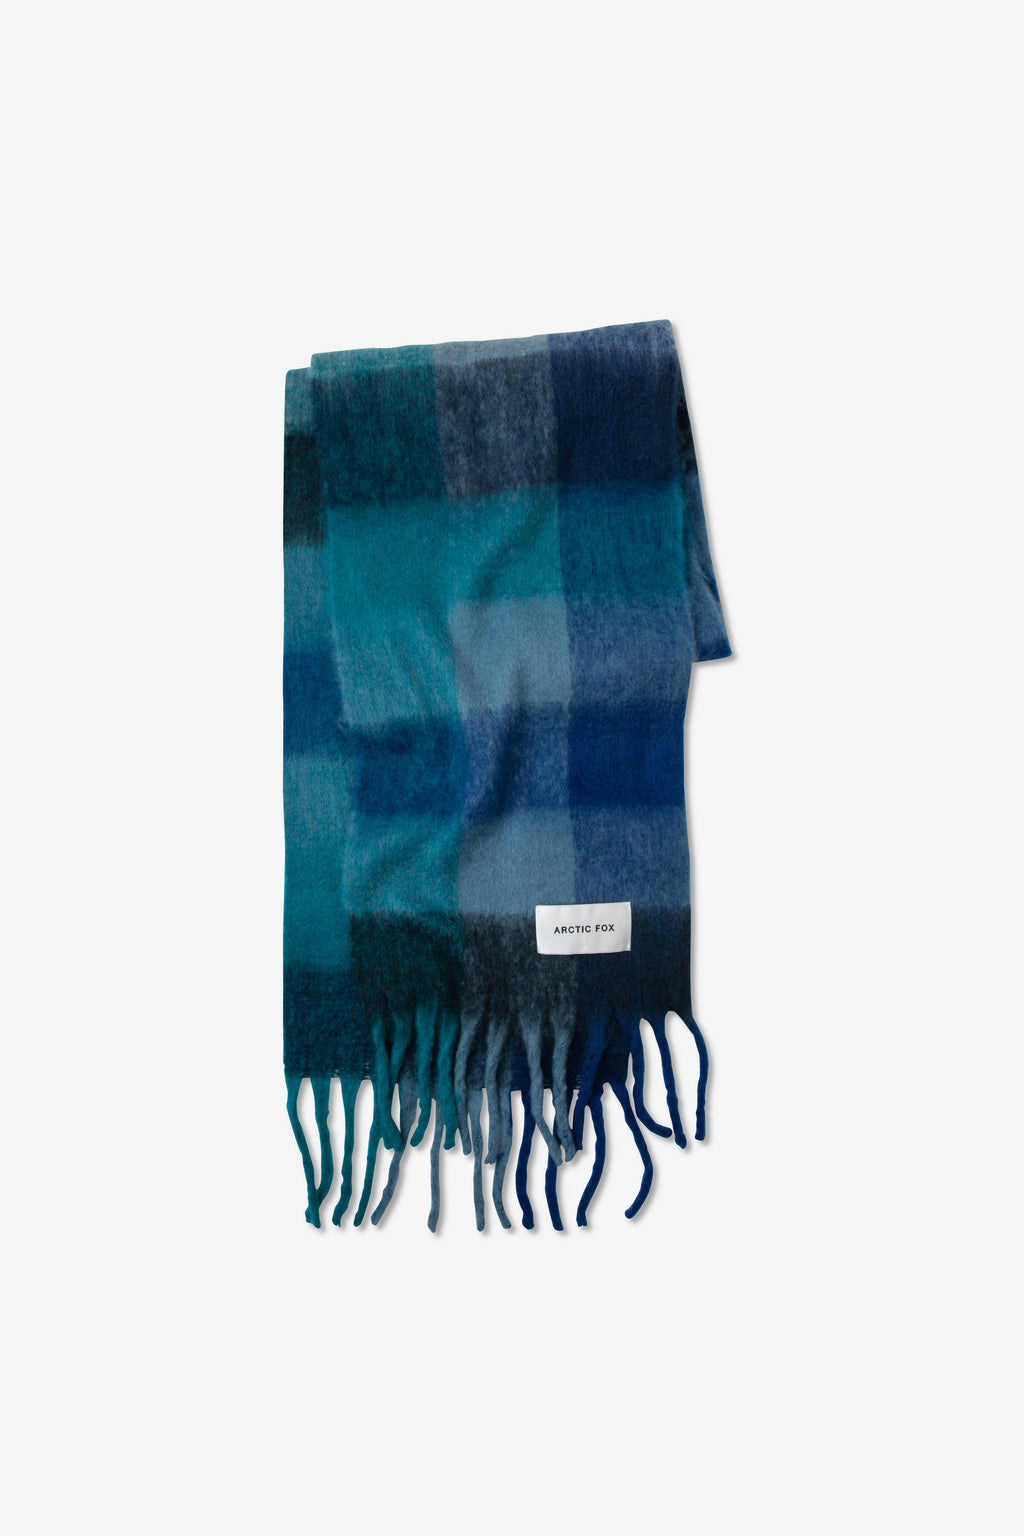 Arctic Fox & Co. The Reykjavik Scarf Yellow Check